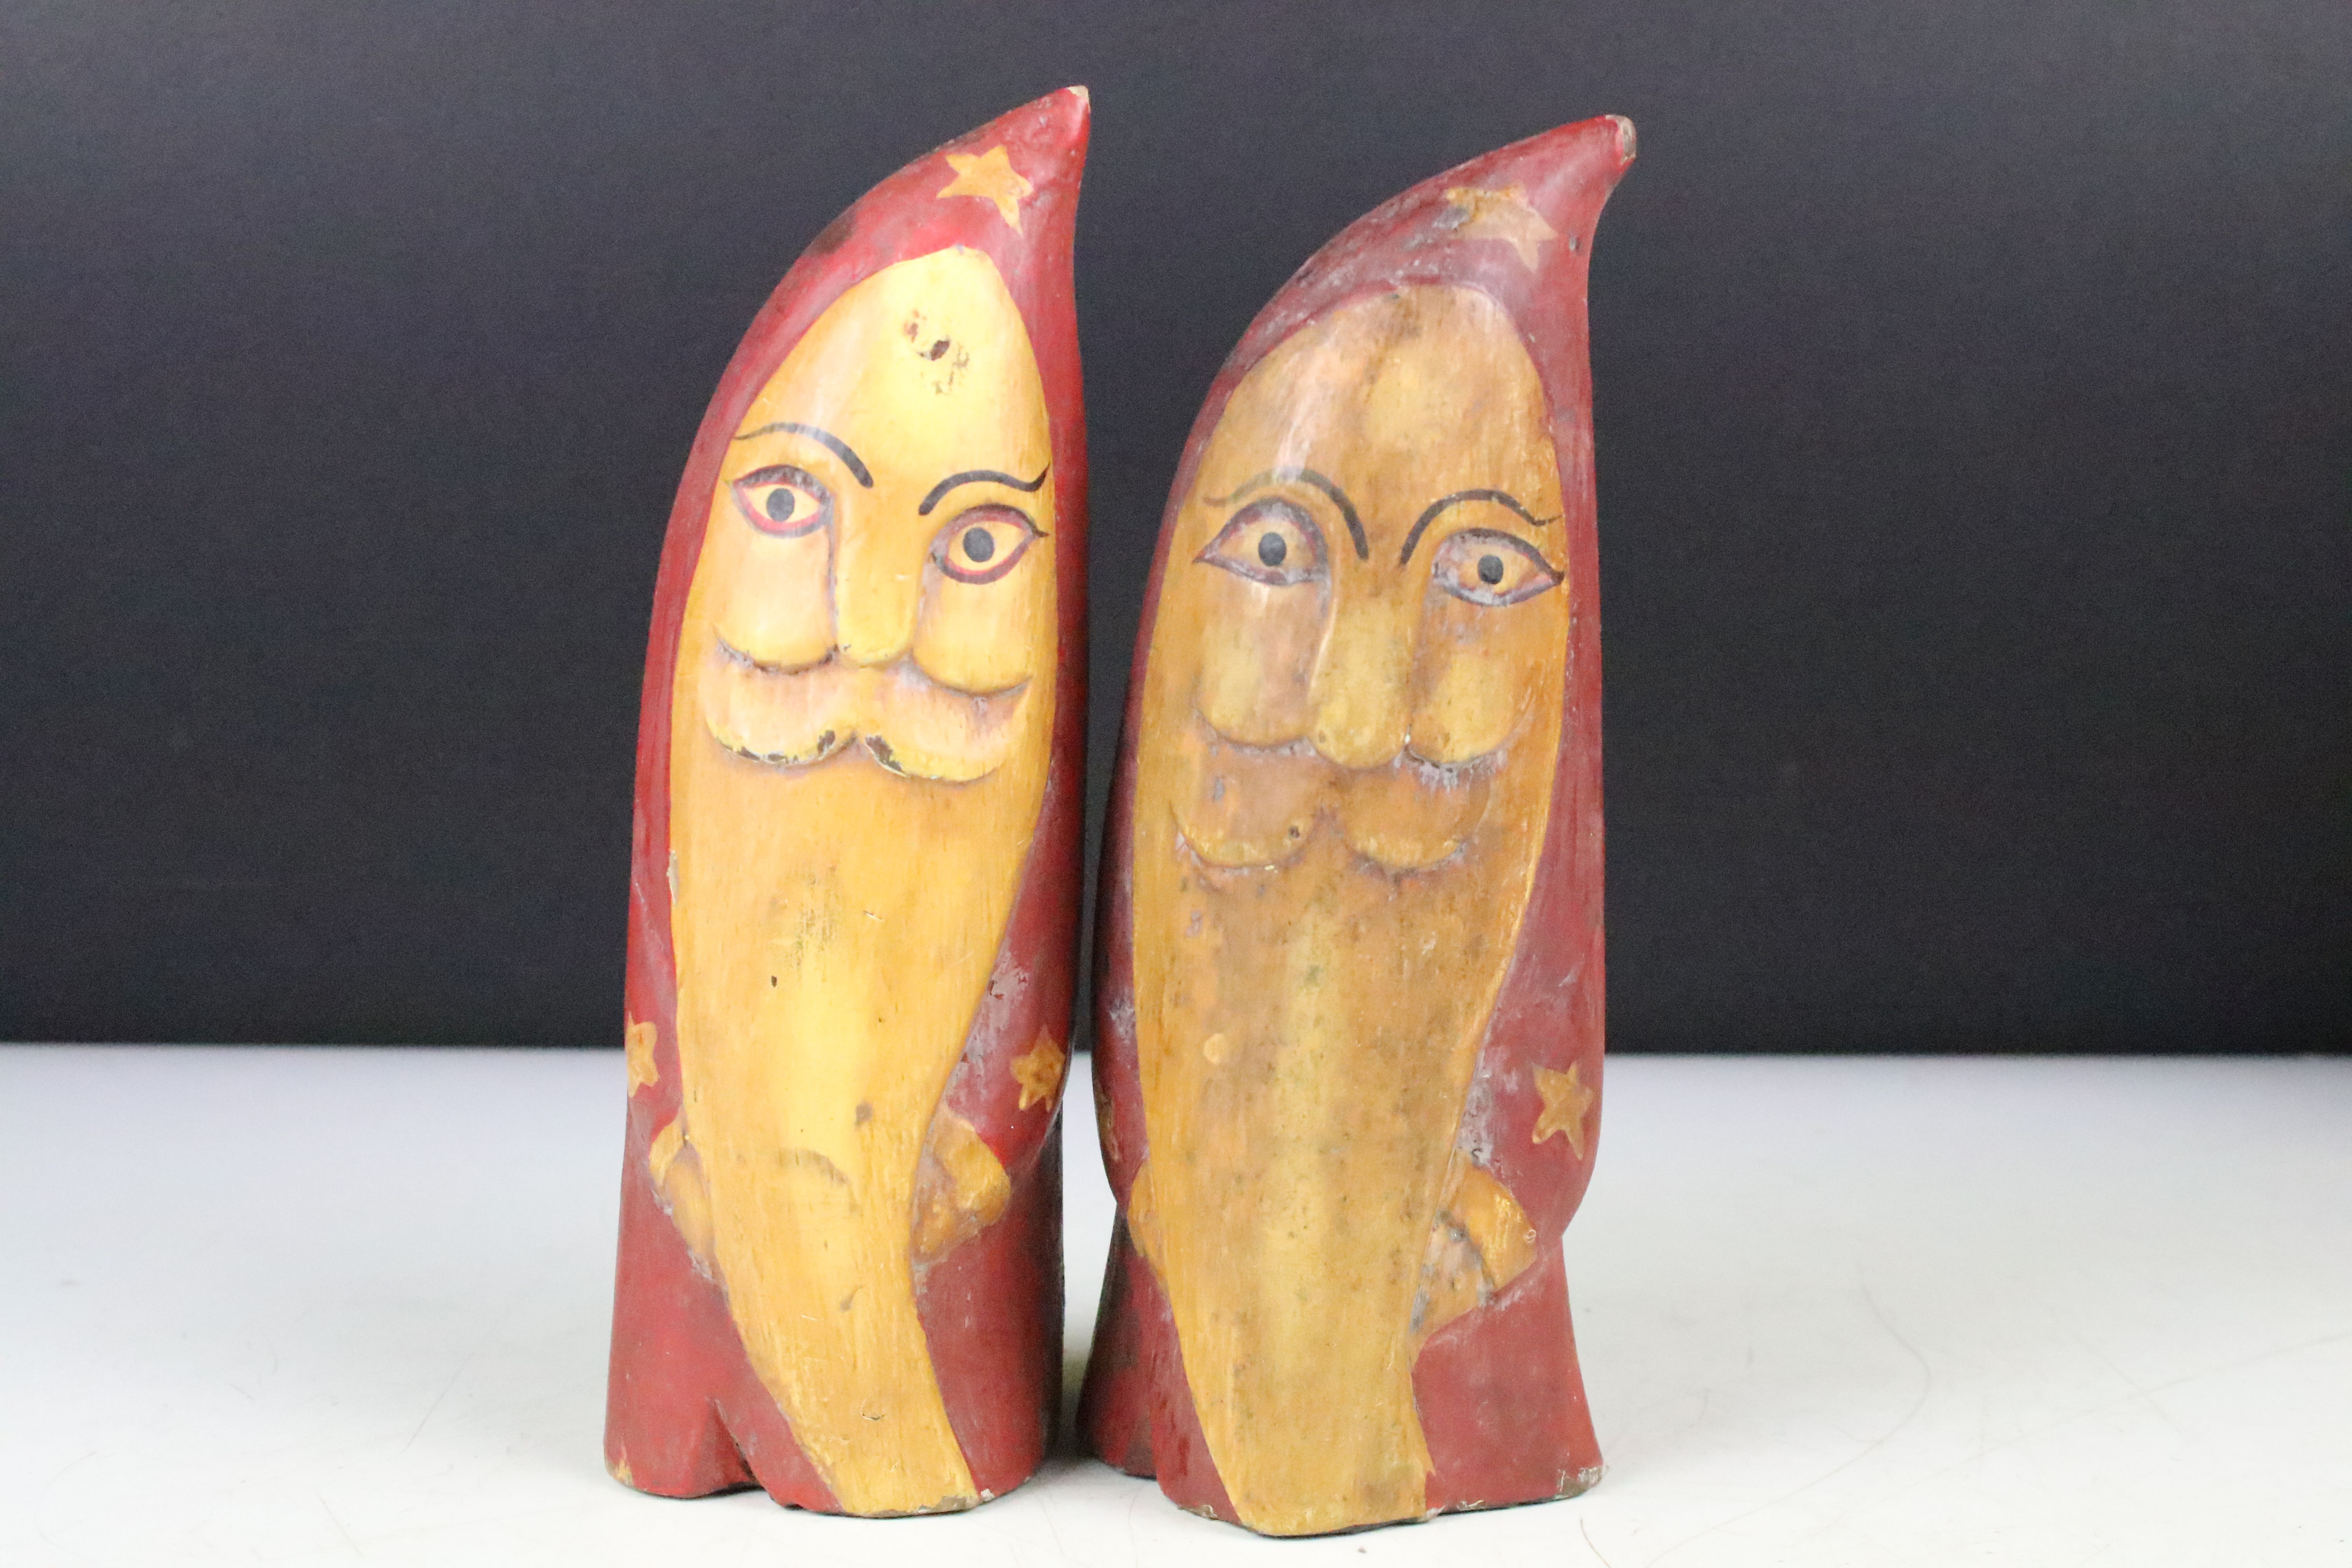 Set of four Scandinavian style folk art painted wooden figures, tallest approx 20cm - Image 4 of 5